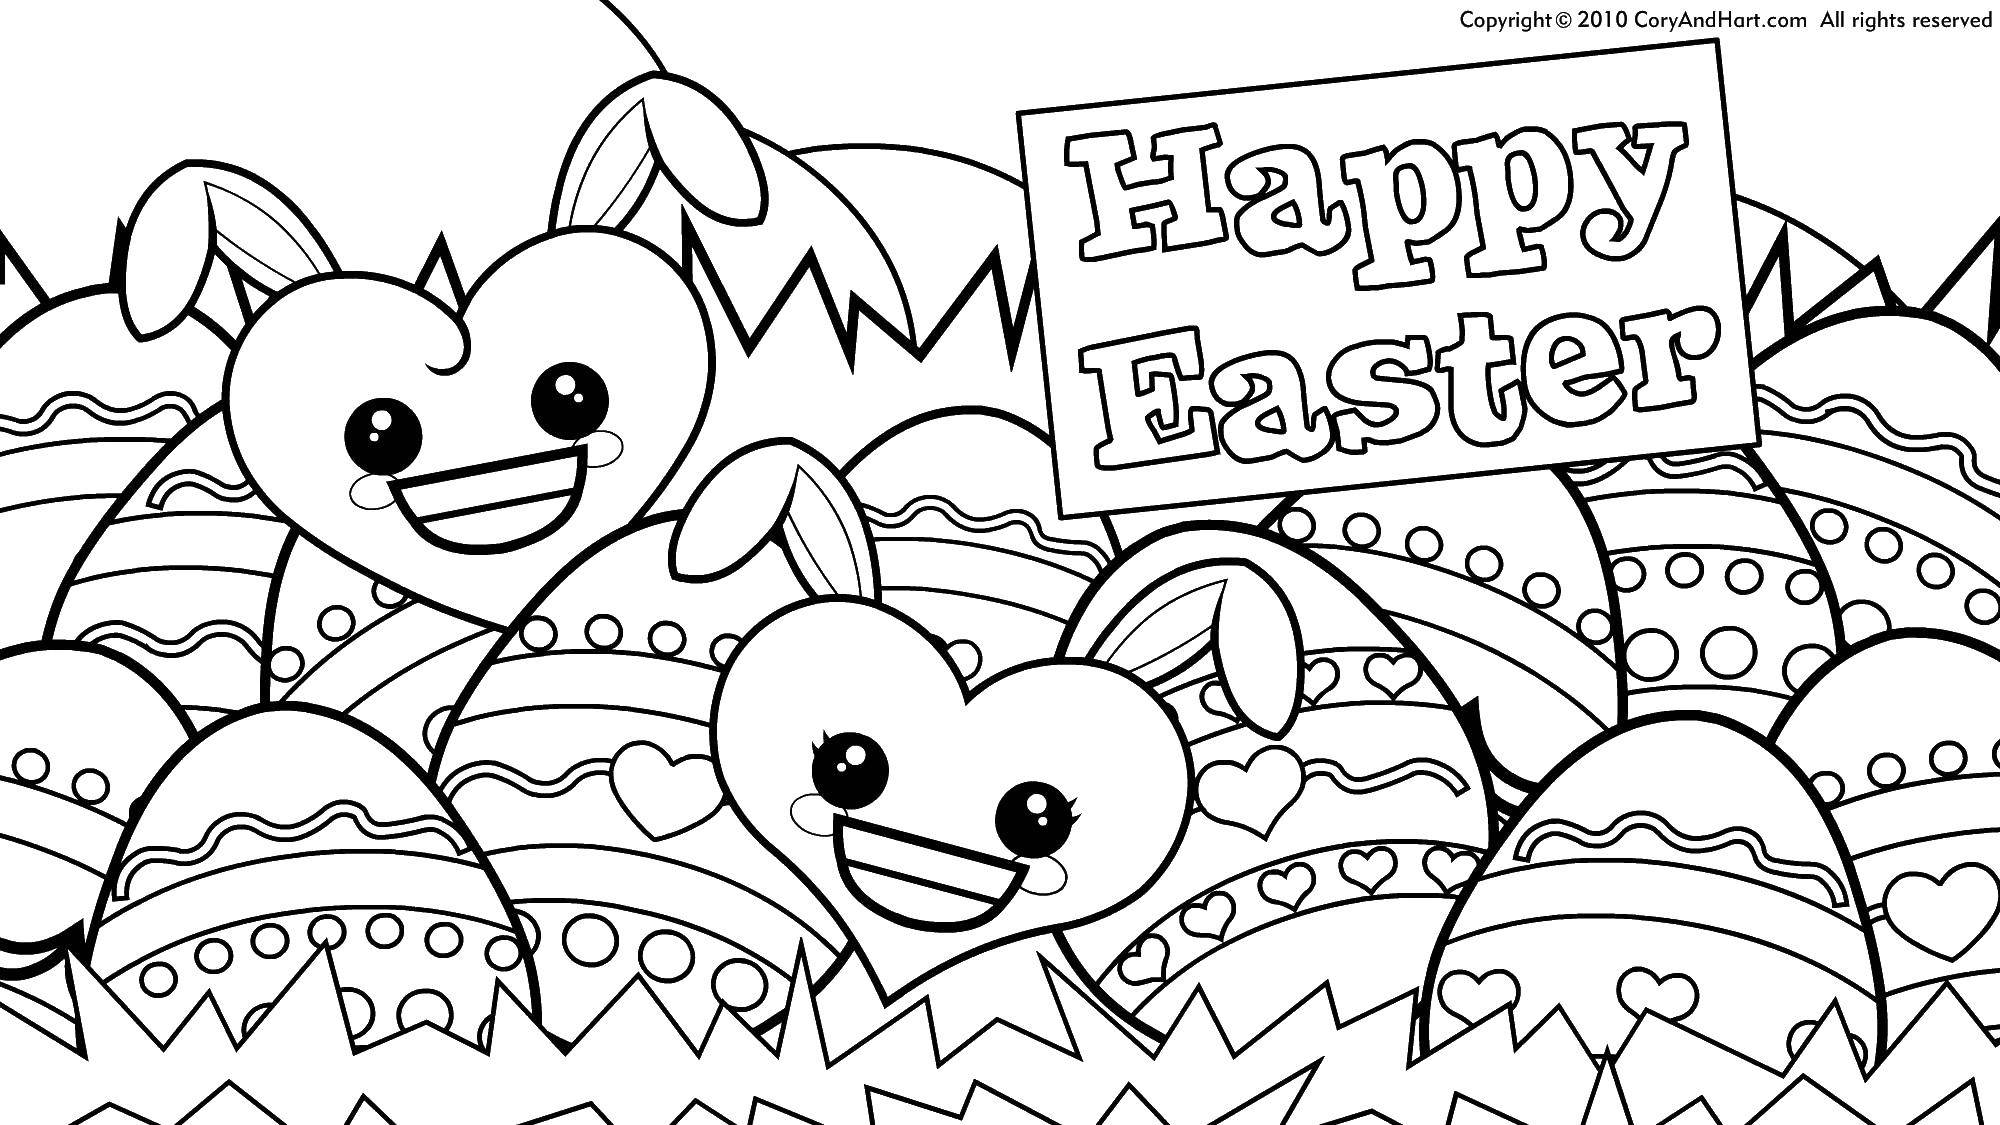 Coloring The Easter Bunny. Category coloring Easter. Tags:  Easter Bunny, eggs.